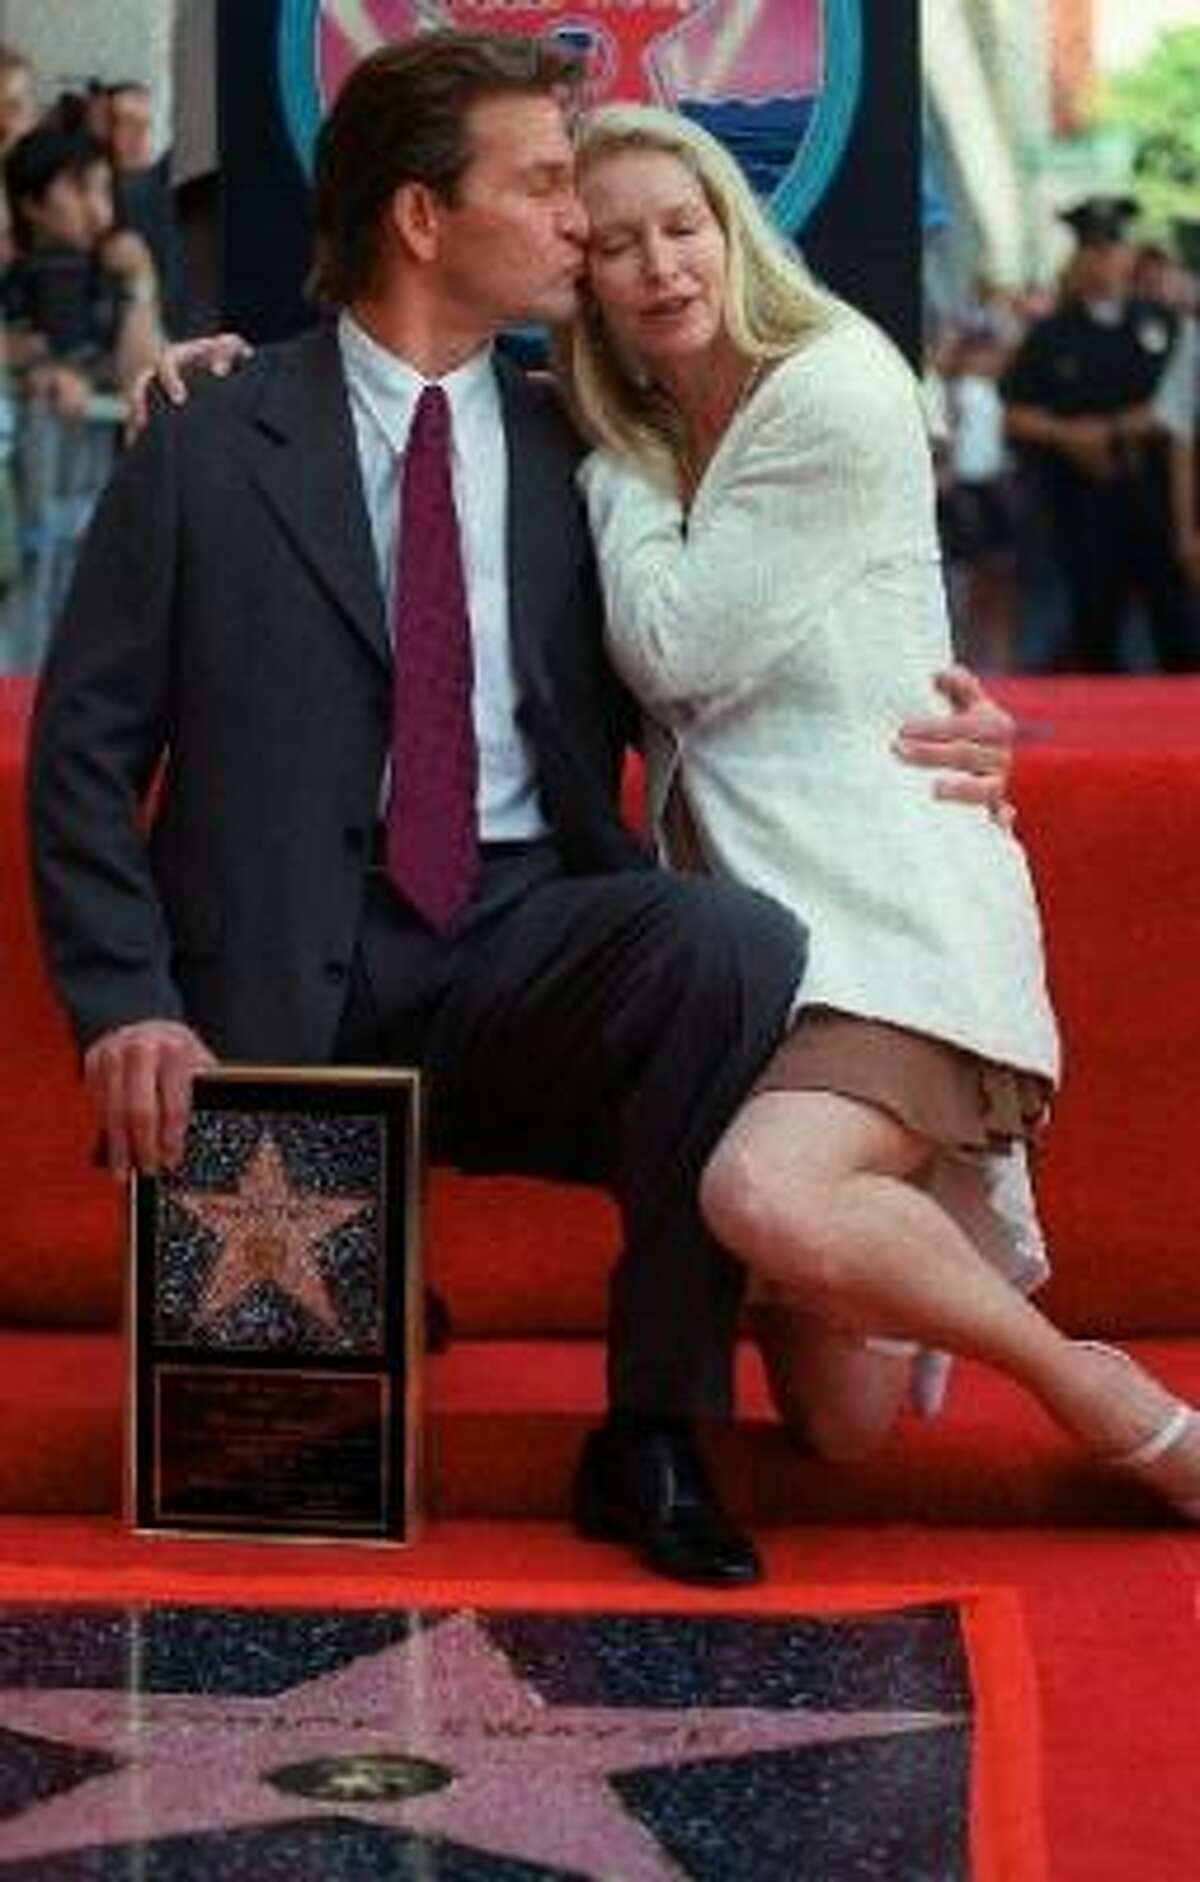 Swayze kisses his wife, Lisa, after the unveiling of his star on the Hollywood Walk of Fame in 1997.